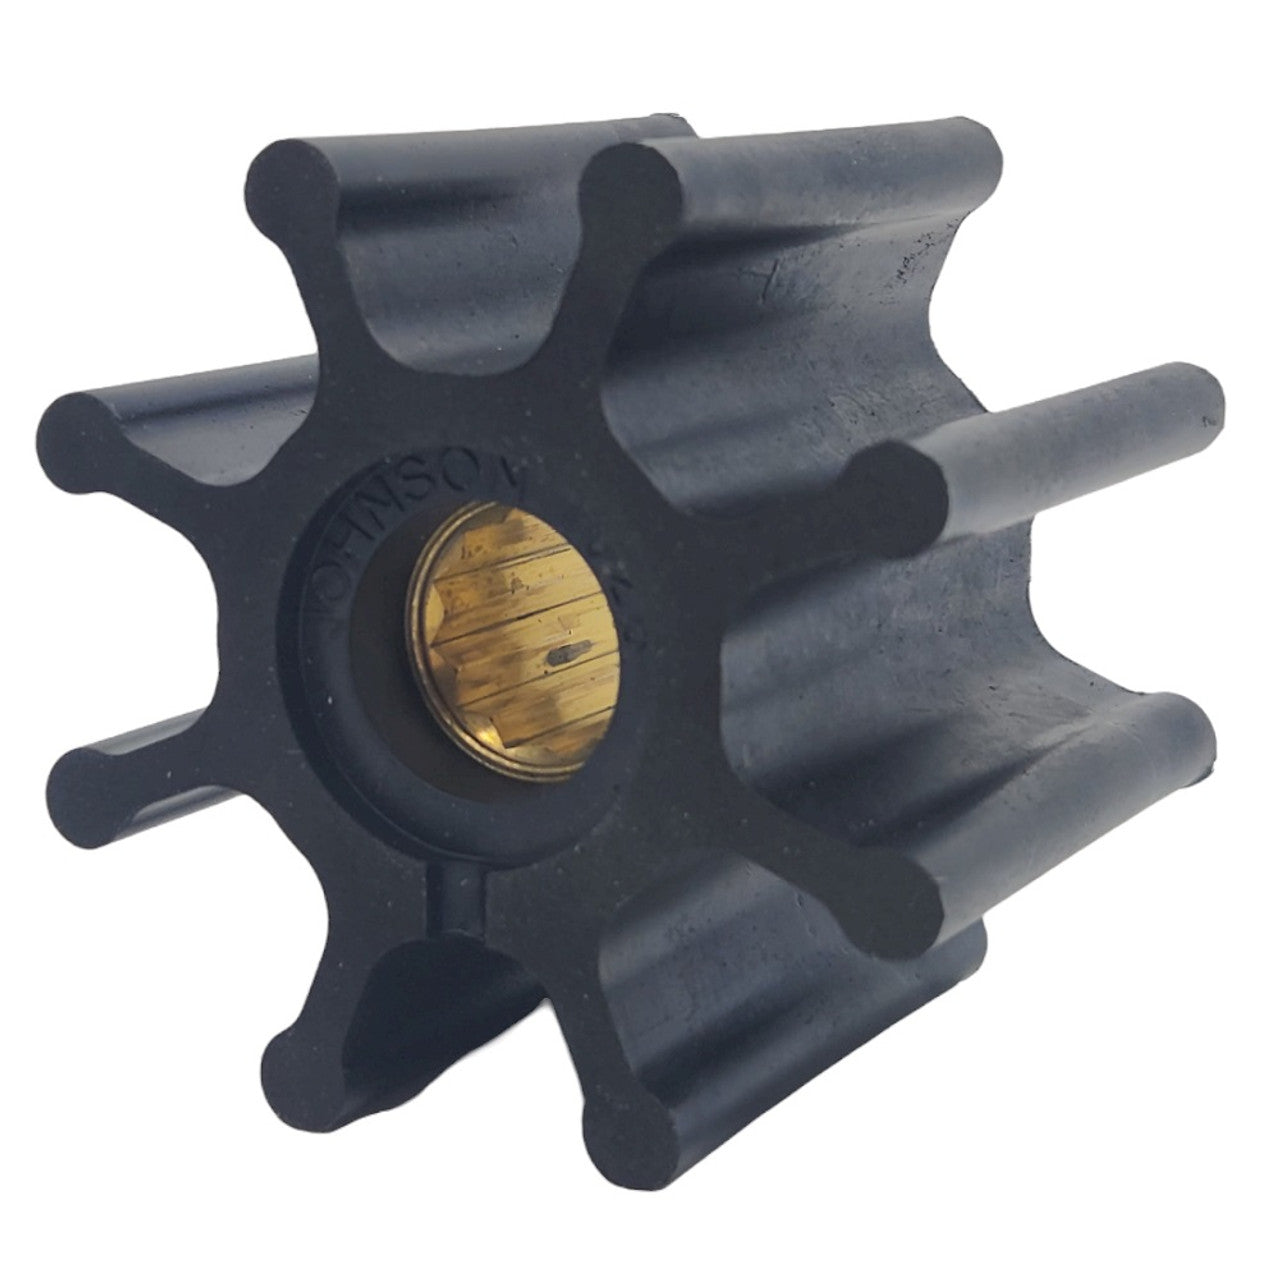 JOHNSON Impellers 09-1028B-9 (For F7 Pumps)